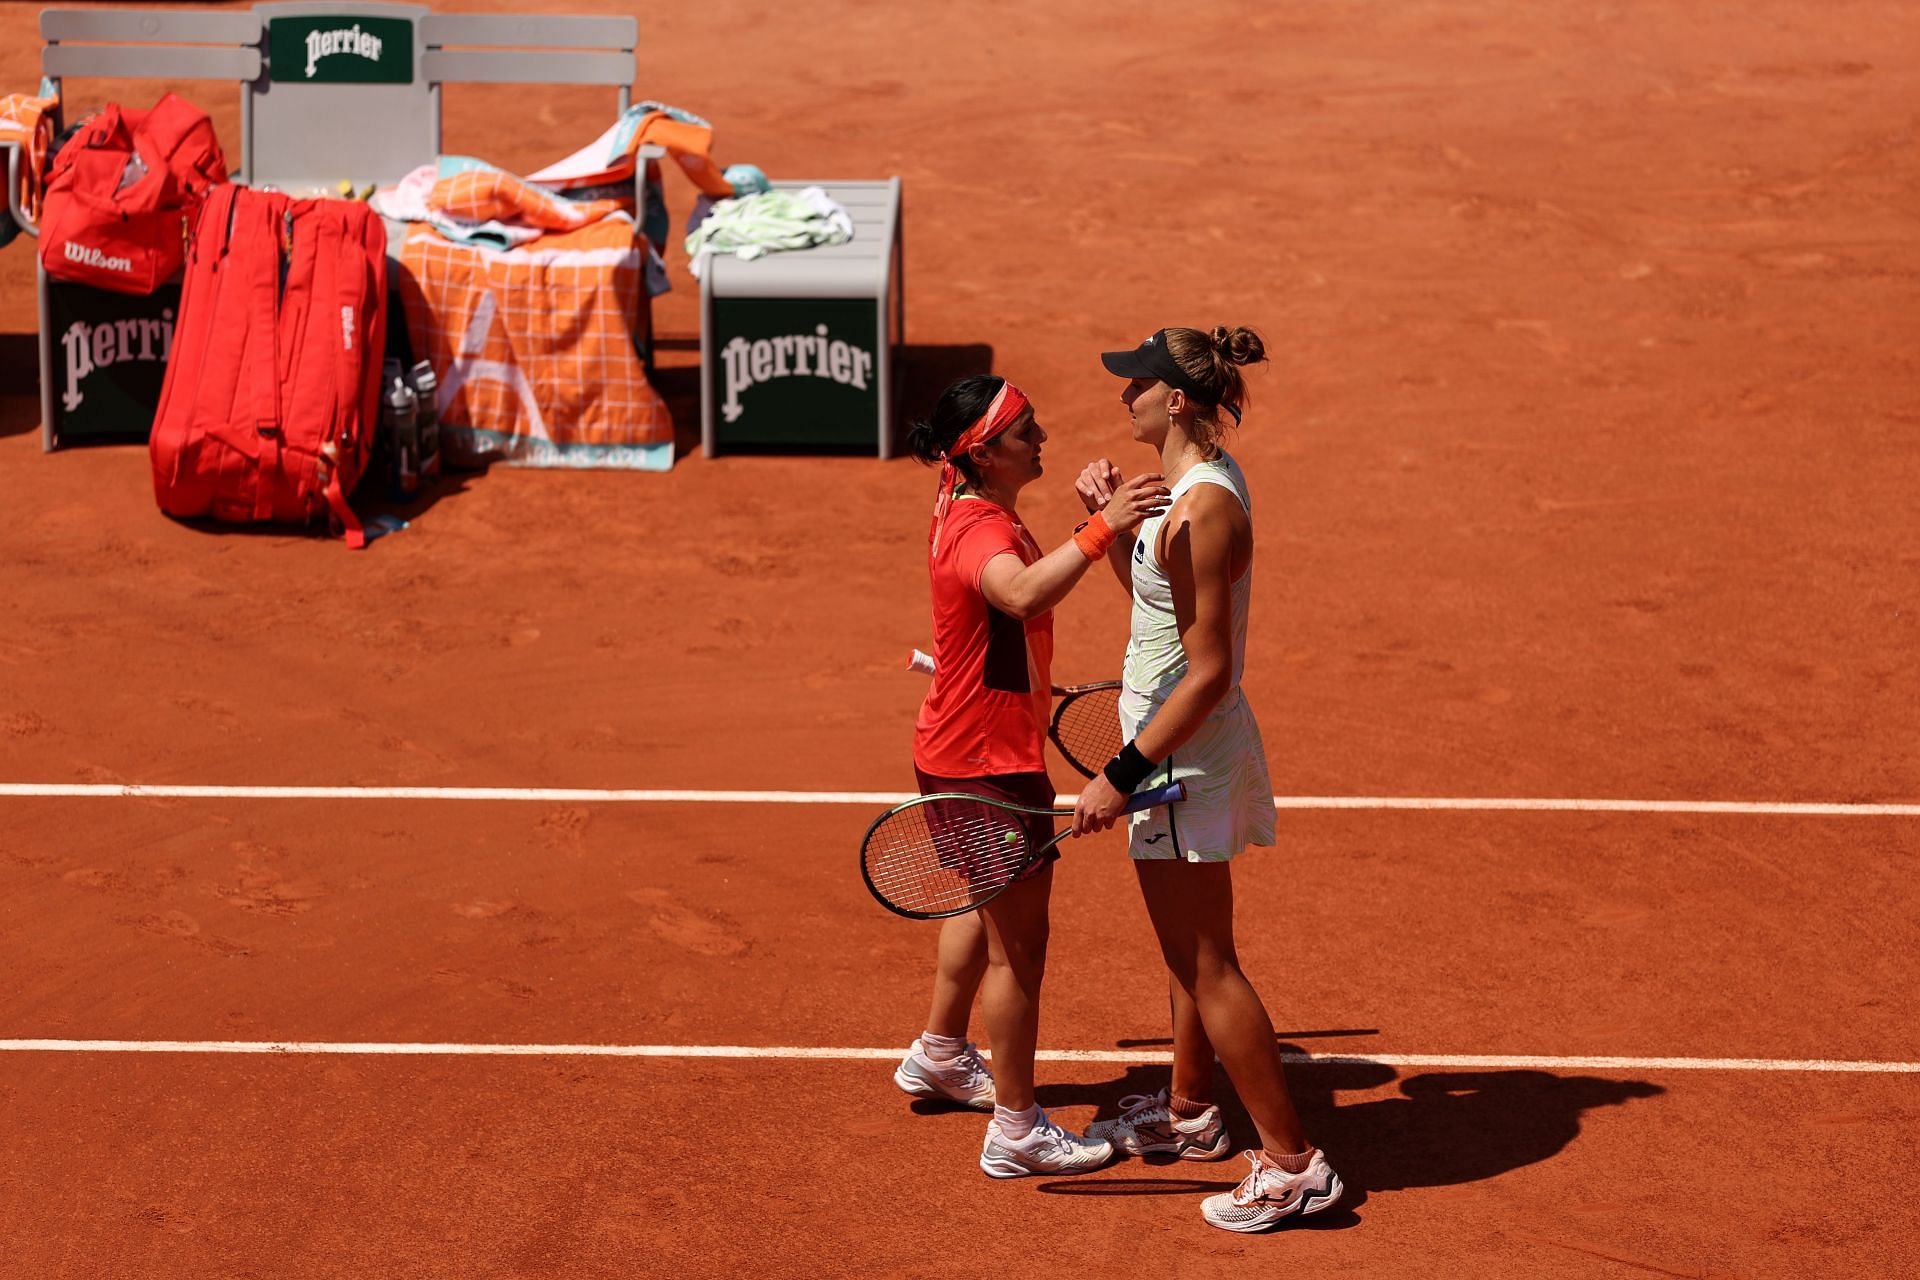 2023 French Open - Ons Jabeur congratulates Haddad Maia after QF loss